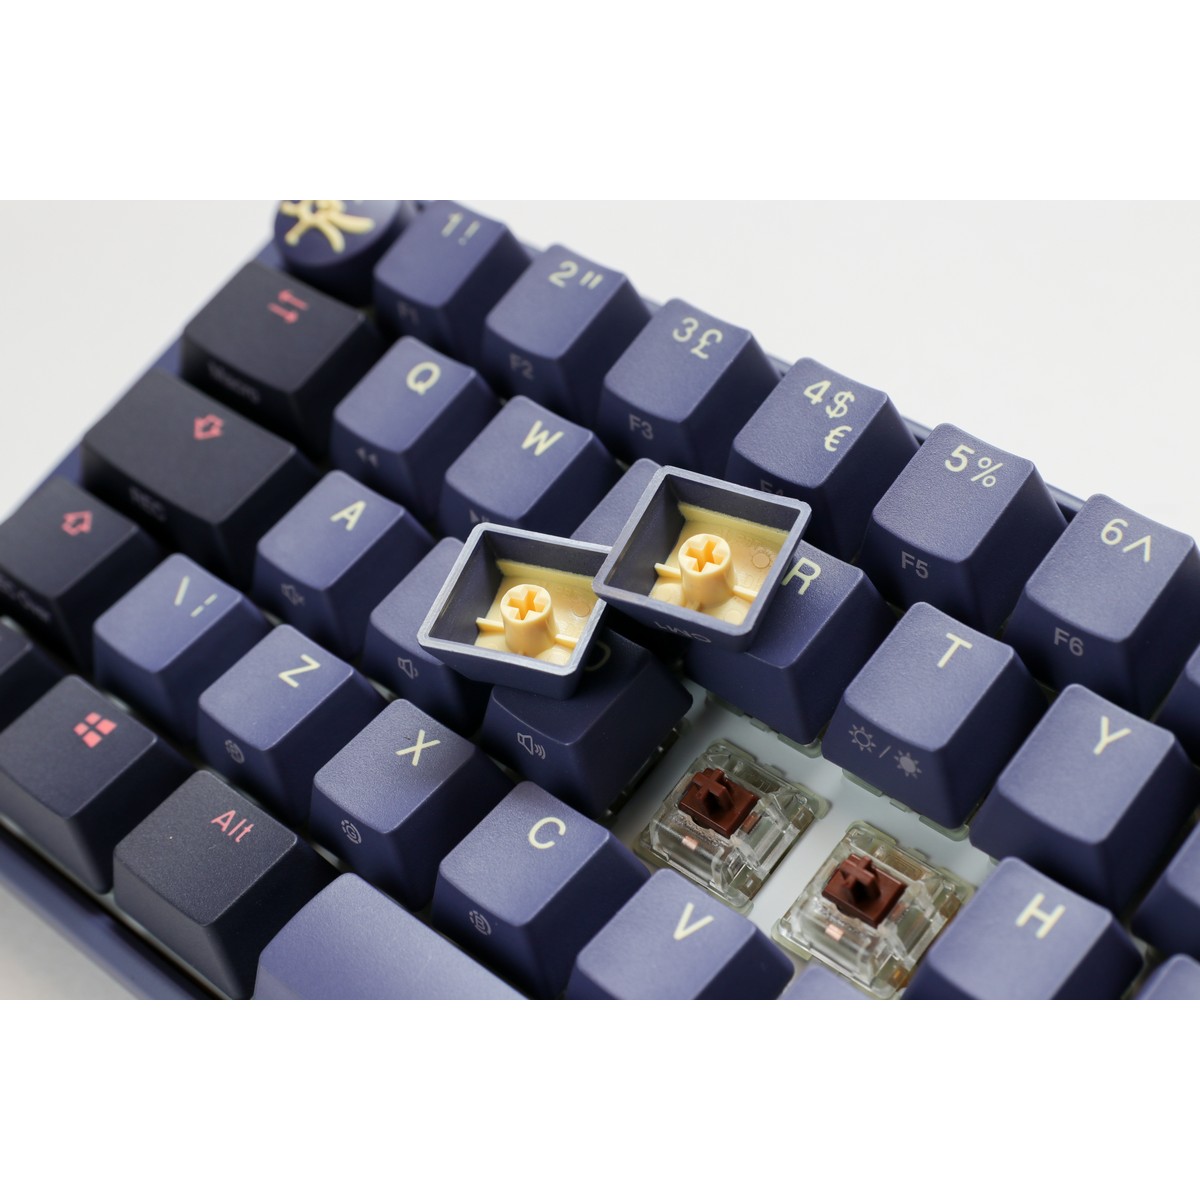 Ducky - Ducky One 3 Cosmic SF 65% USB RGB Mechanical Gaming Keyboard Cherry MX Silent Red Switch - UK Layout